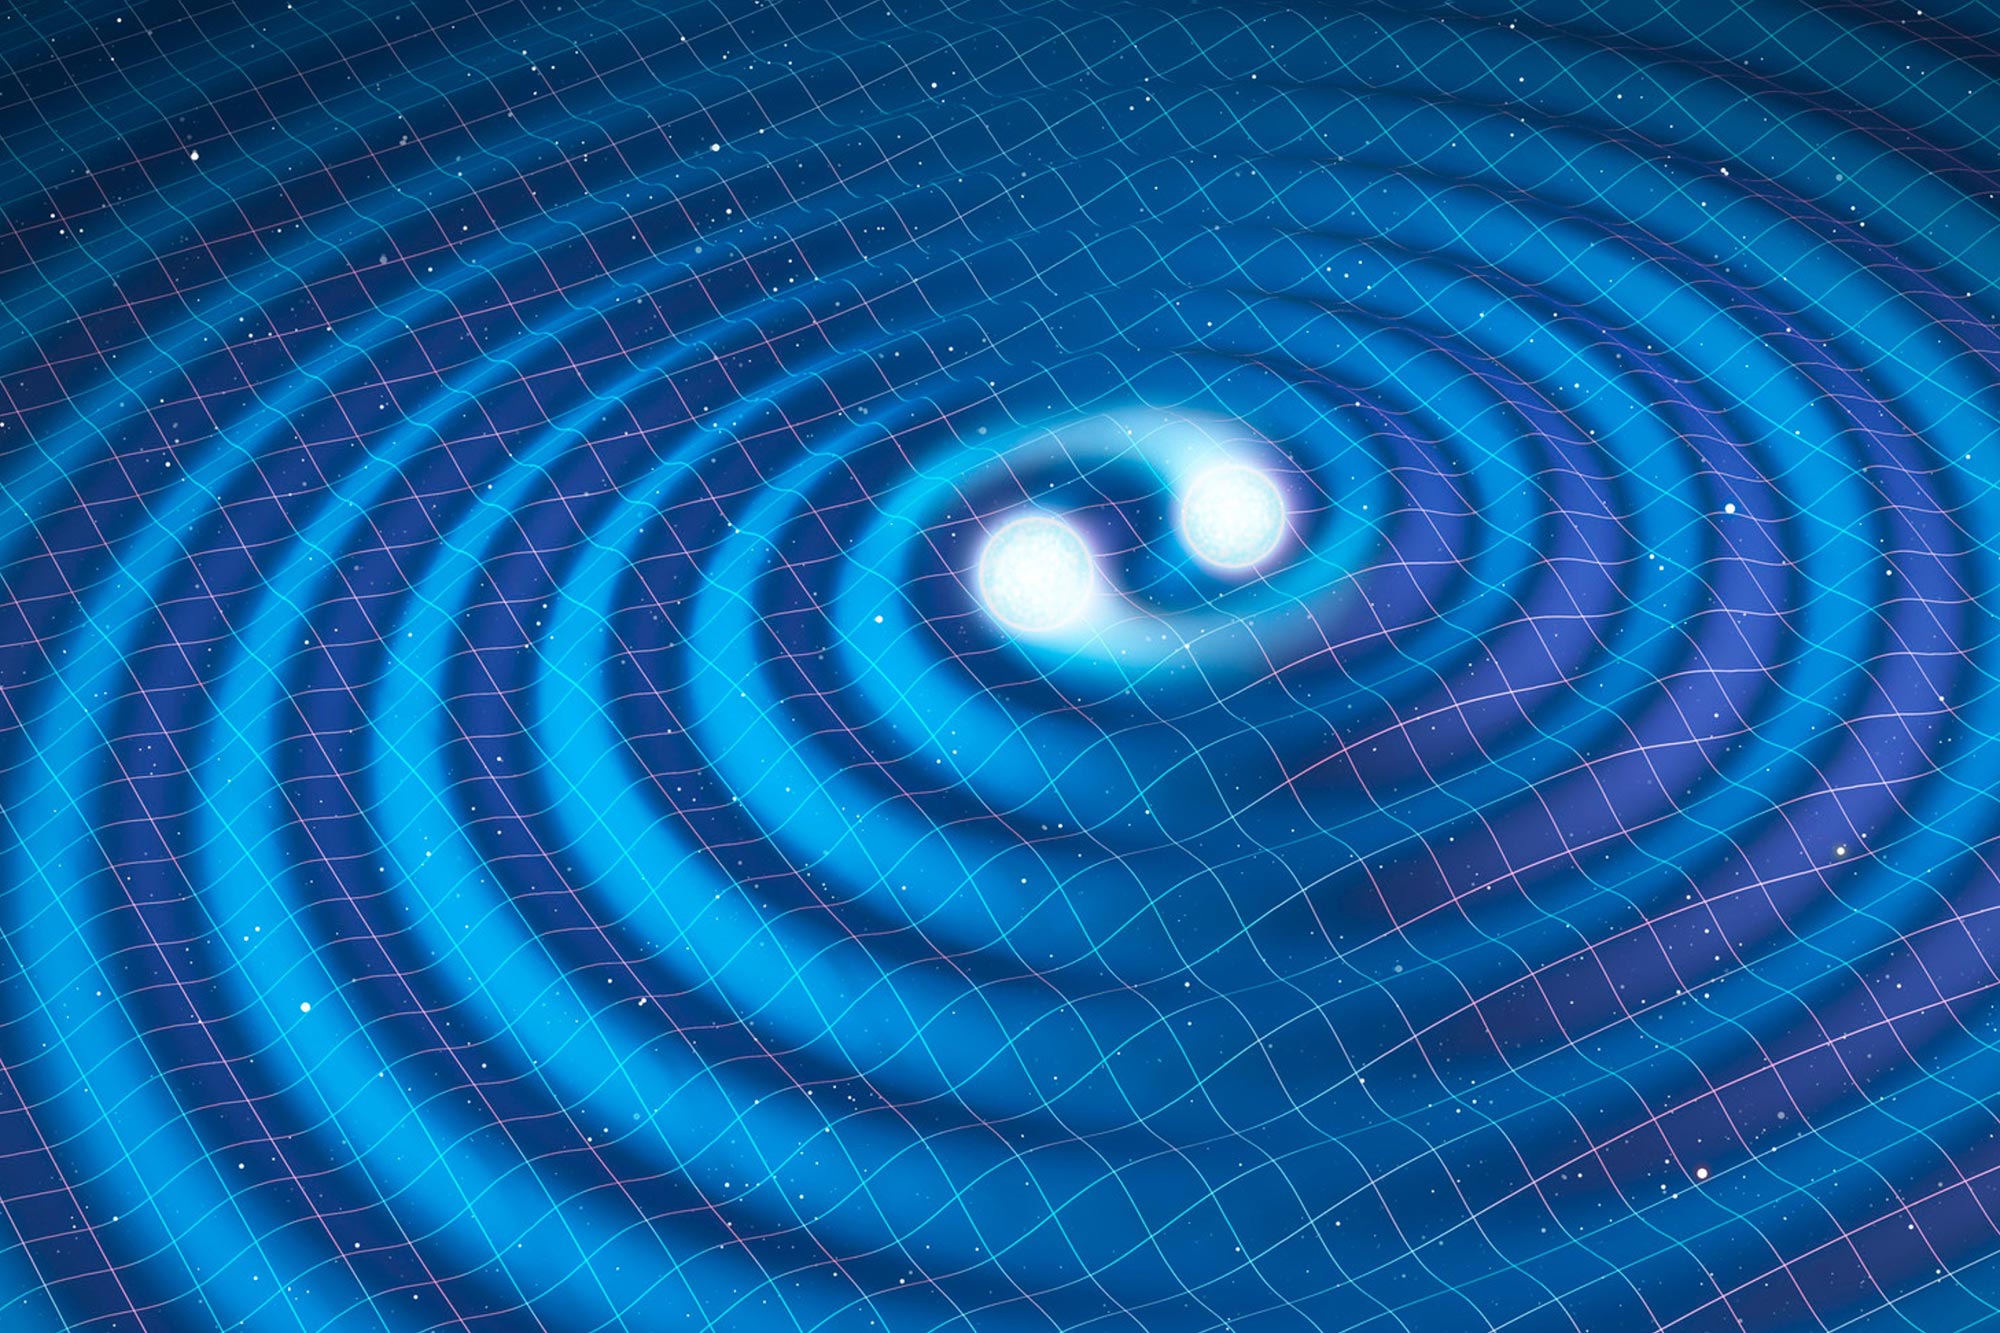 Unraveling the secrets of the universe resumes with improved gravitational wave detection